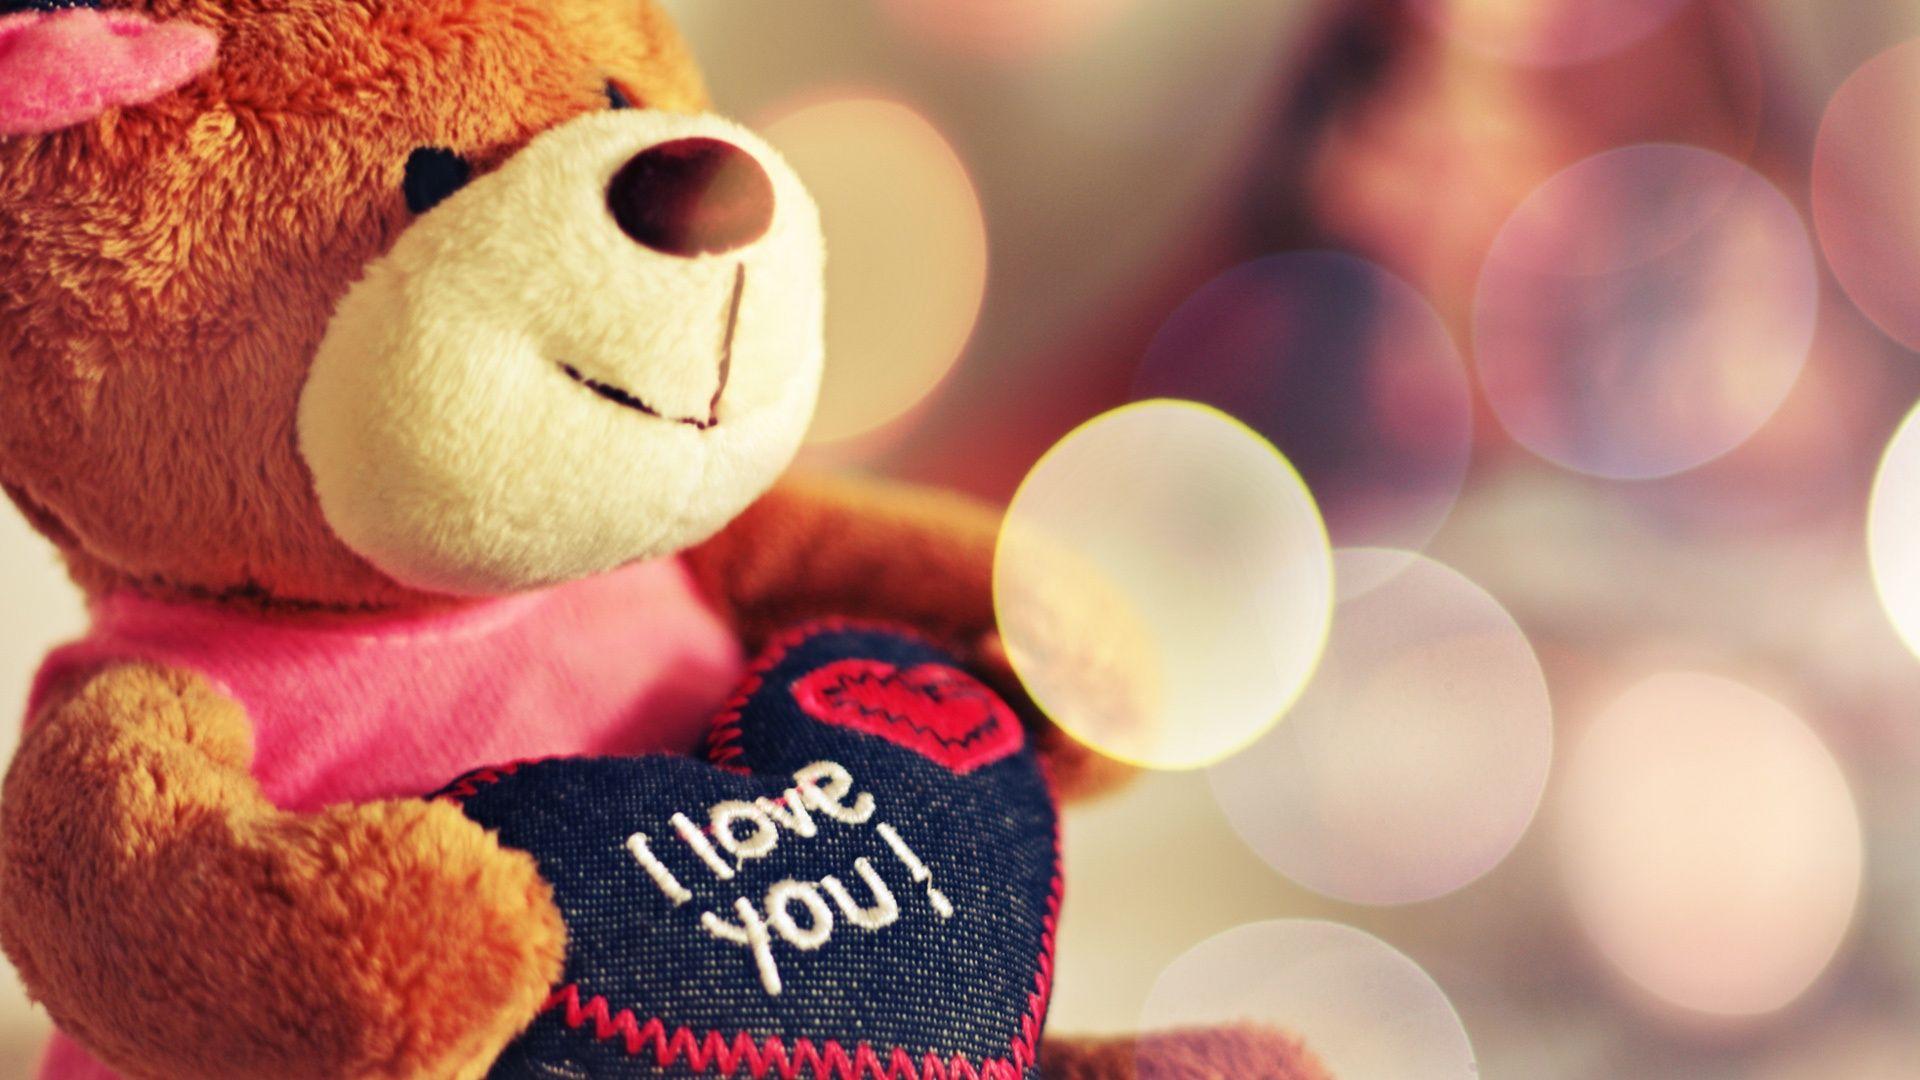 I Love You Teddy Bear Wallpaper in jpg format for free download